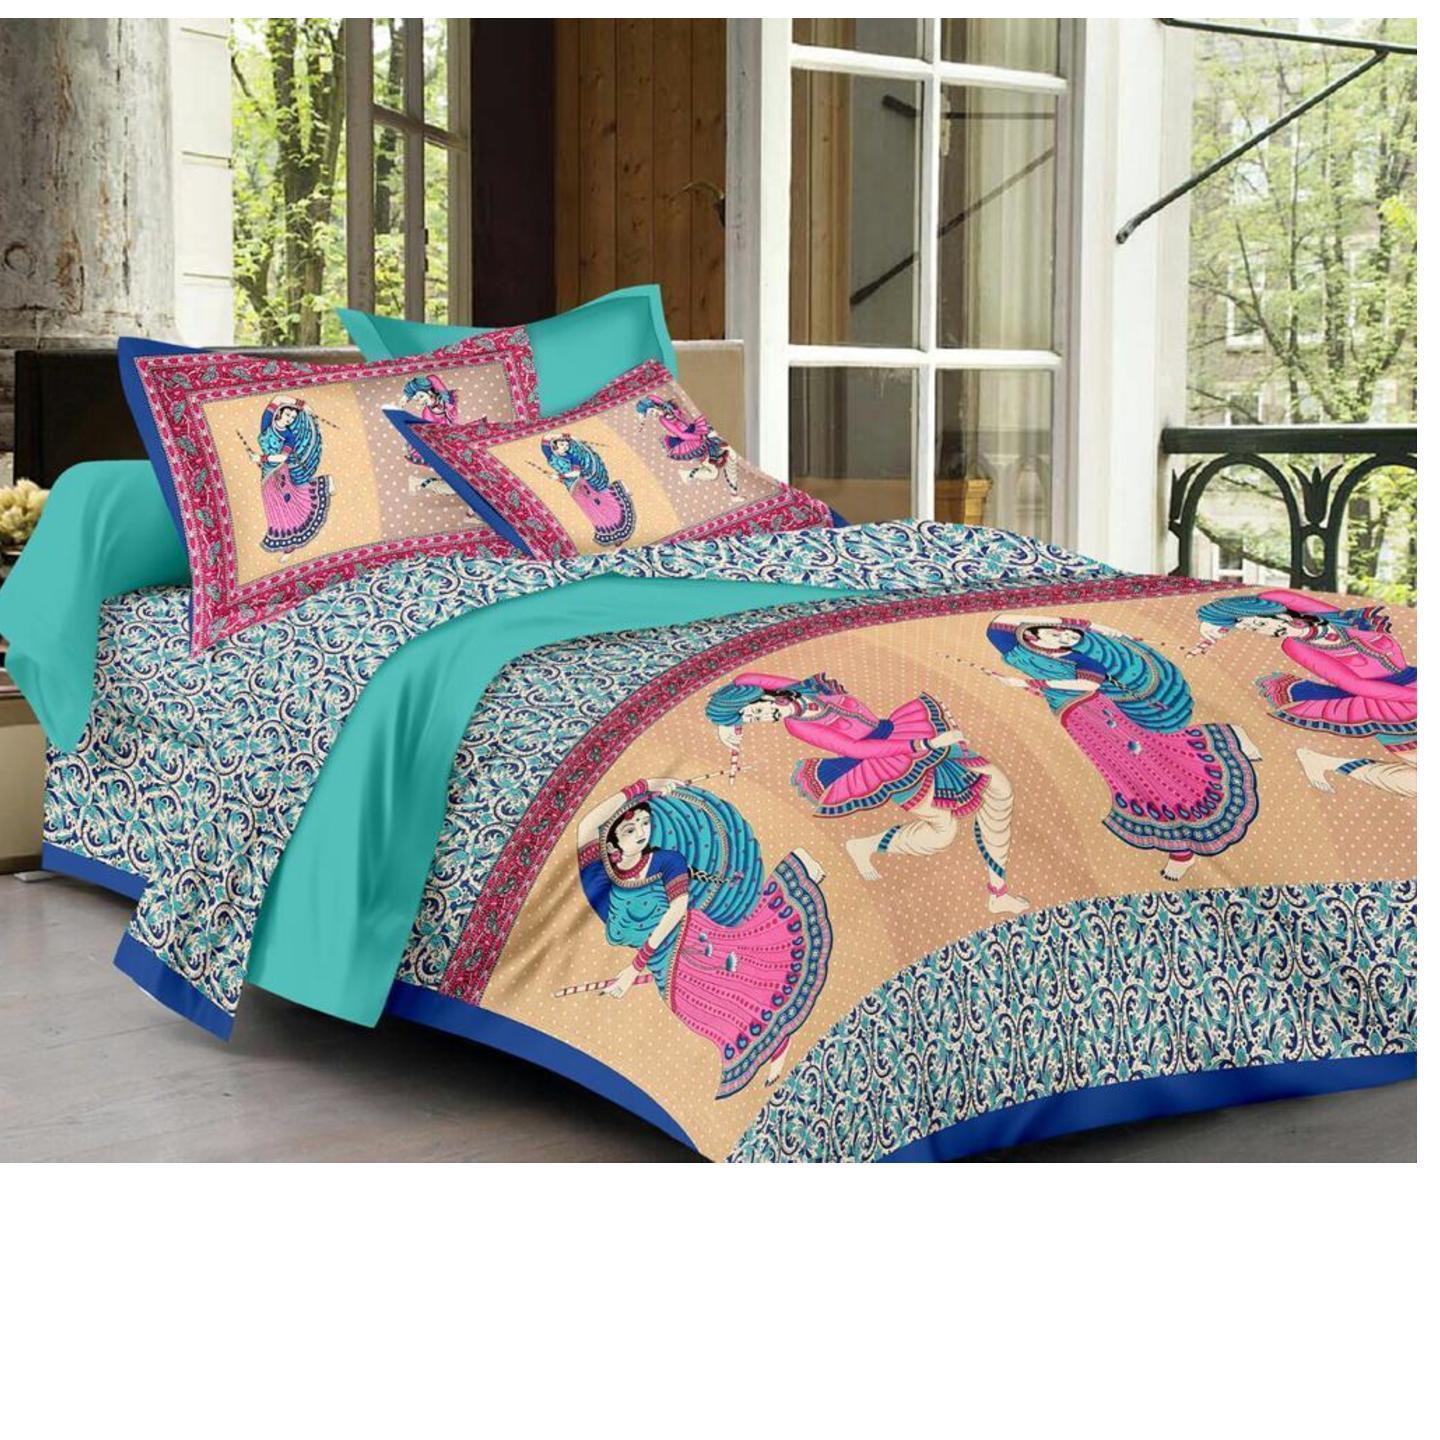 Handtex Home Cotton Floral Rajasthani Jaipuri Traditional Printed Double Bed Bedsheet with 2 Pillow Covers